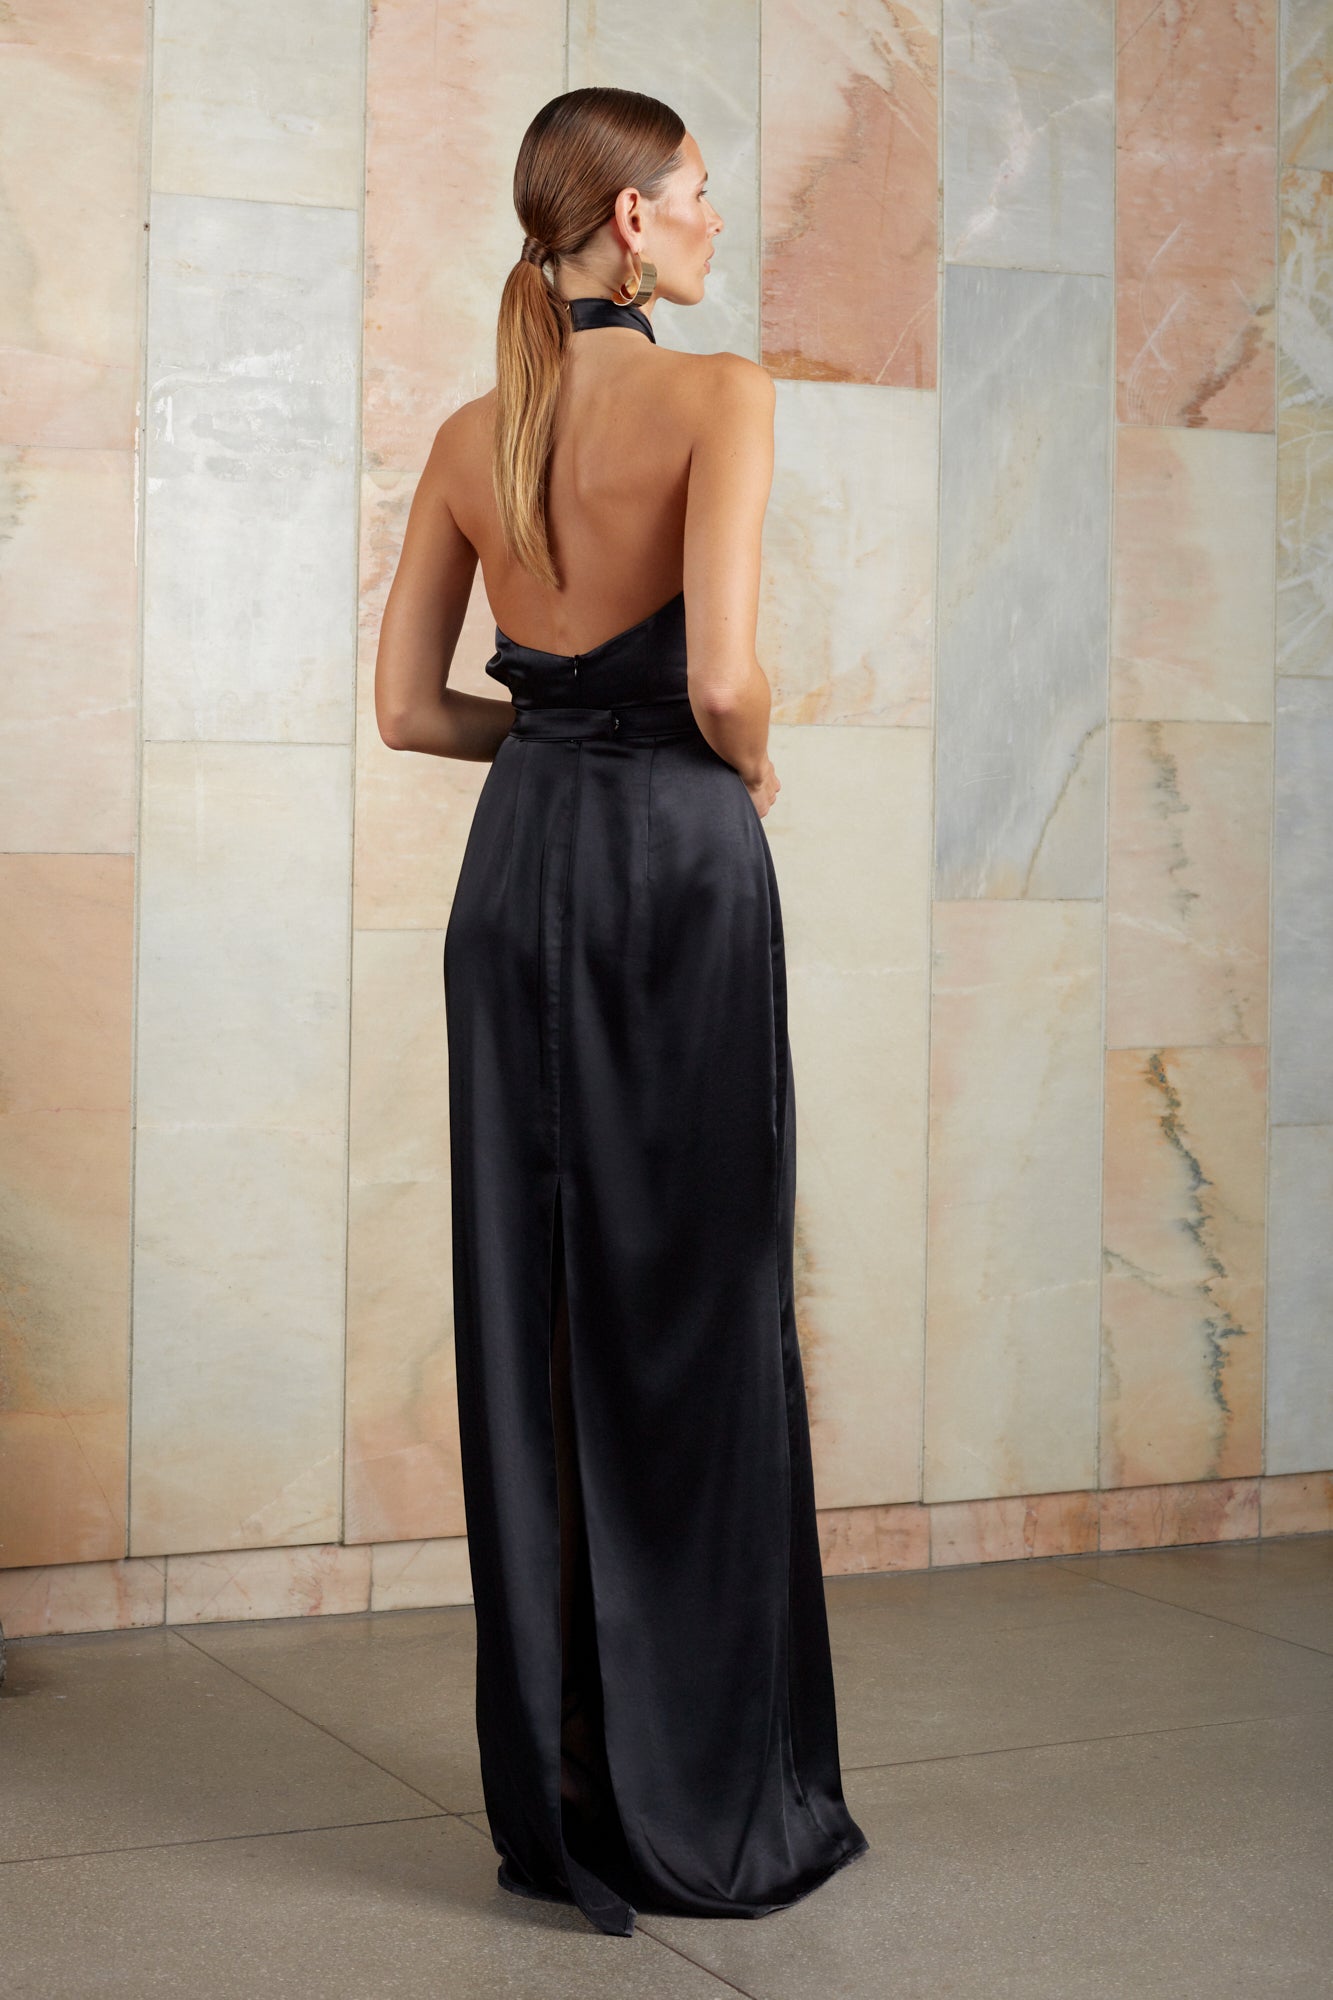 Black formal maxi dress with open back